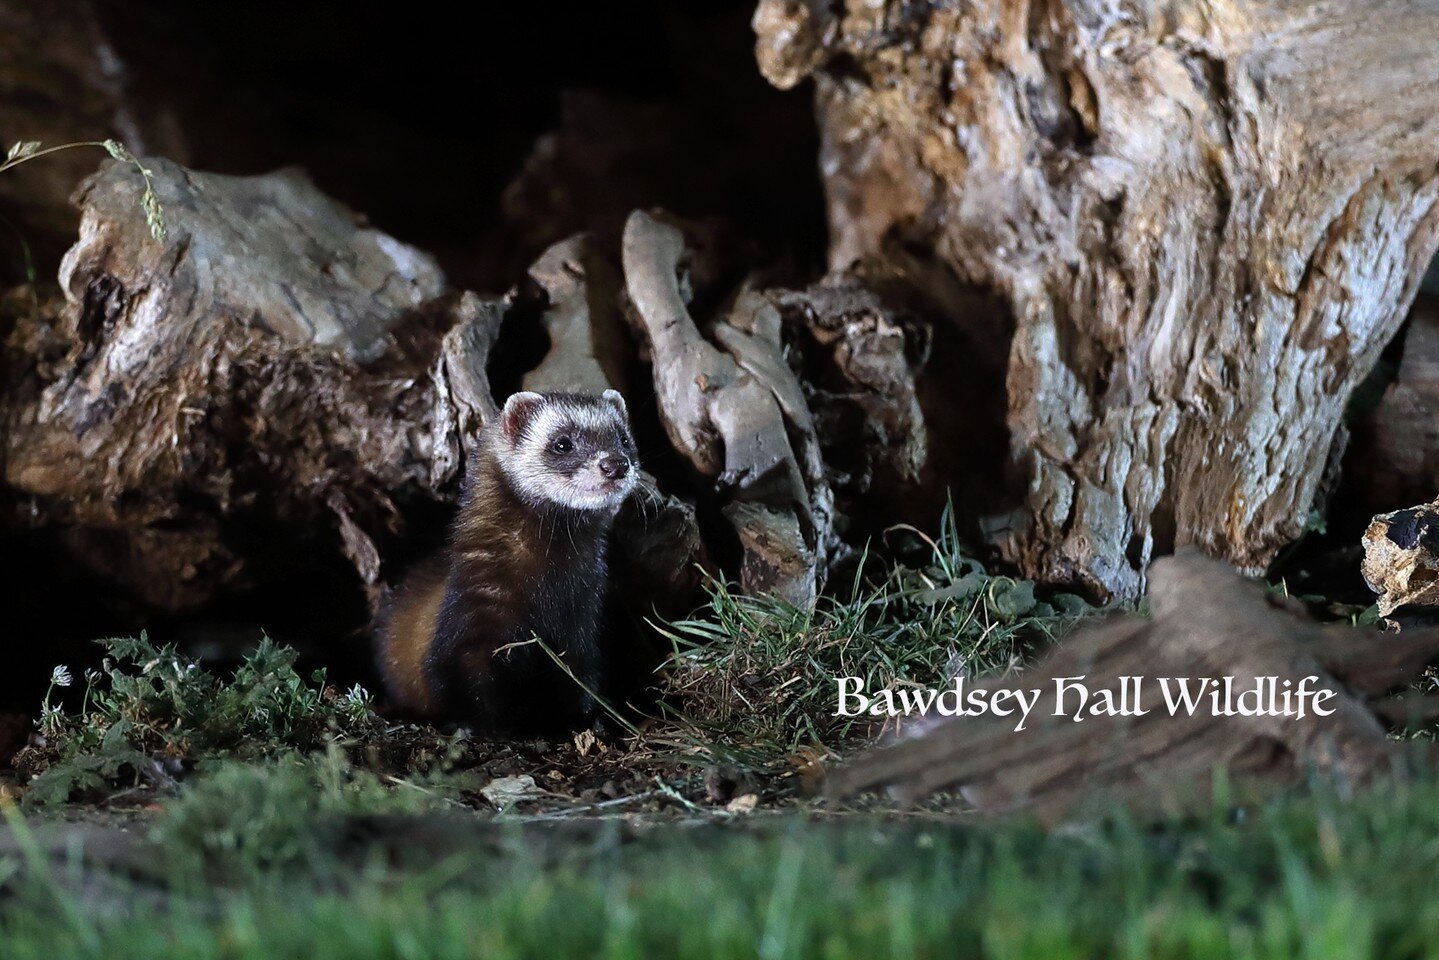 Fantastic photography opportunities currently, including Polecat Kits at Bawdsey Hall Wildlife Photography Hides 

Why not make a mini break of it with accommodation also available at Bawdsey Hall

www.bawdseyhallwildlifephotographyhides.co.uk
.
.
.
